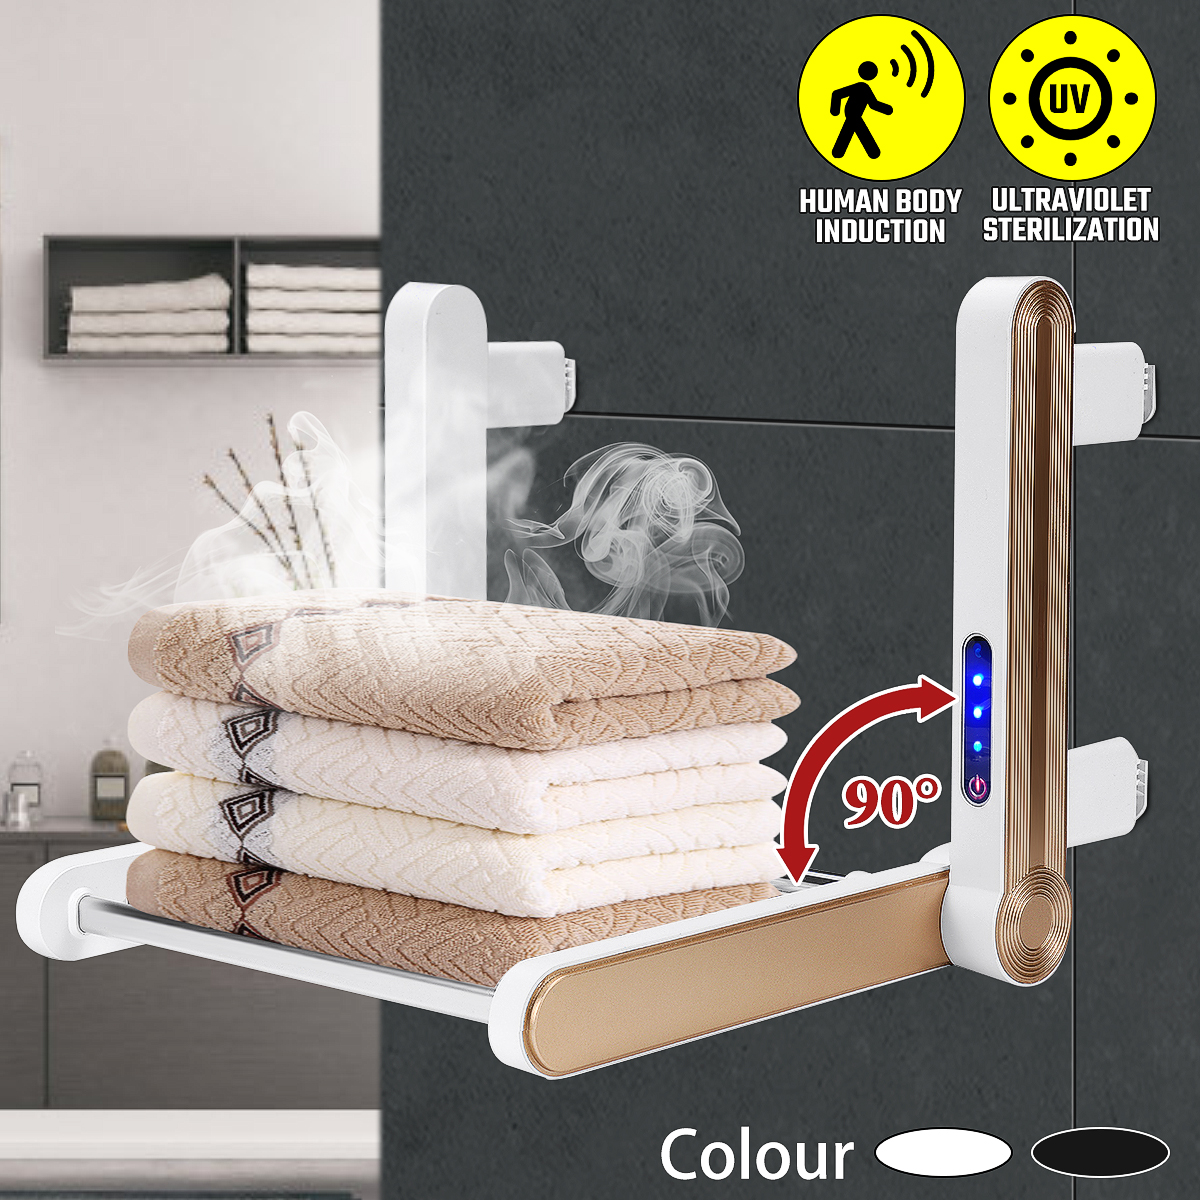 Sterilization-Heating-Household-Intelligent-Induction-disinfection-Towel-Rack-UV-Electric-Heating-Co-1928691-6